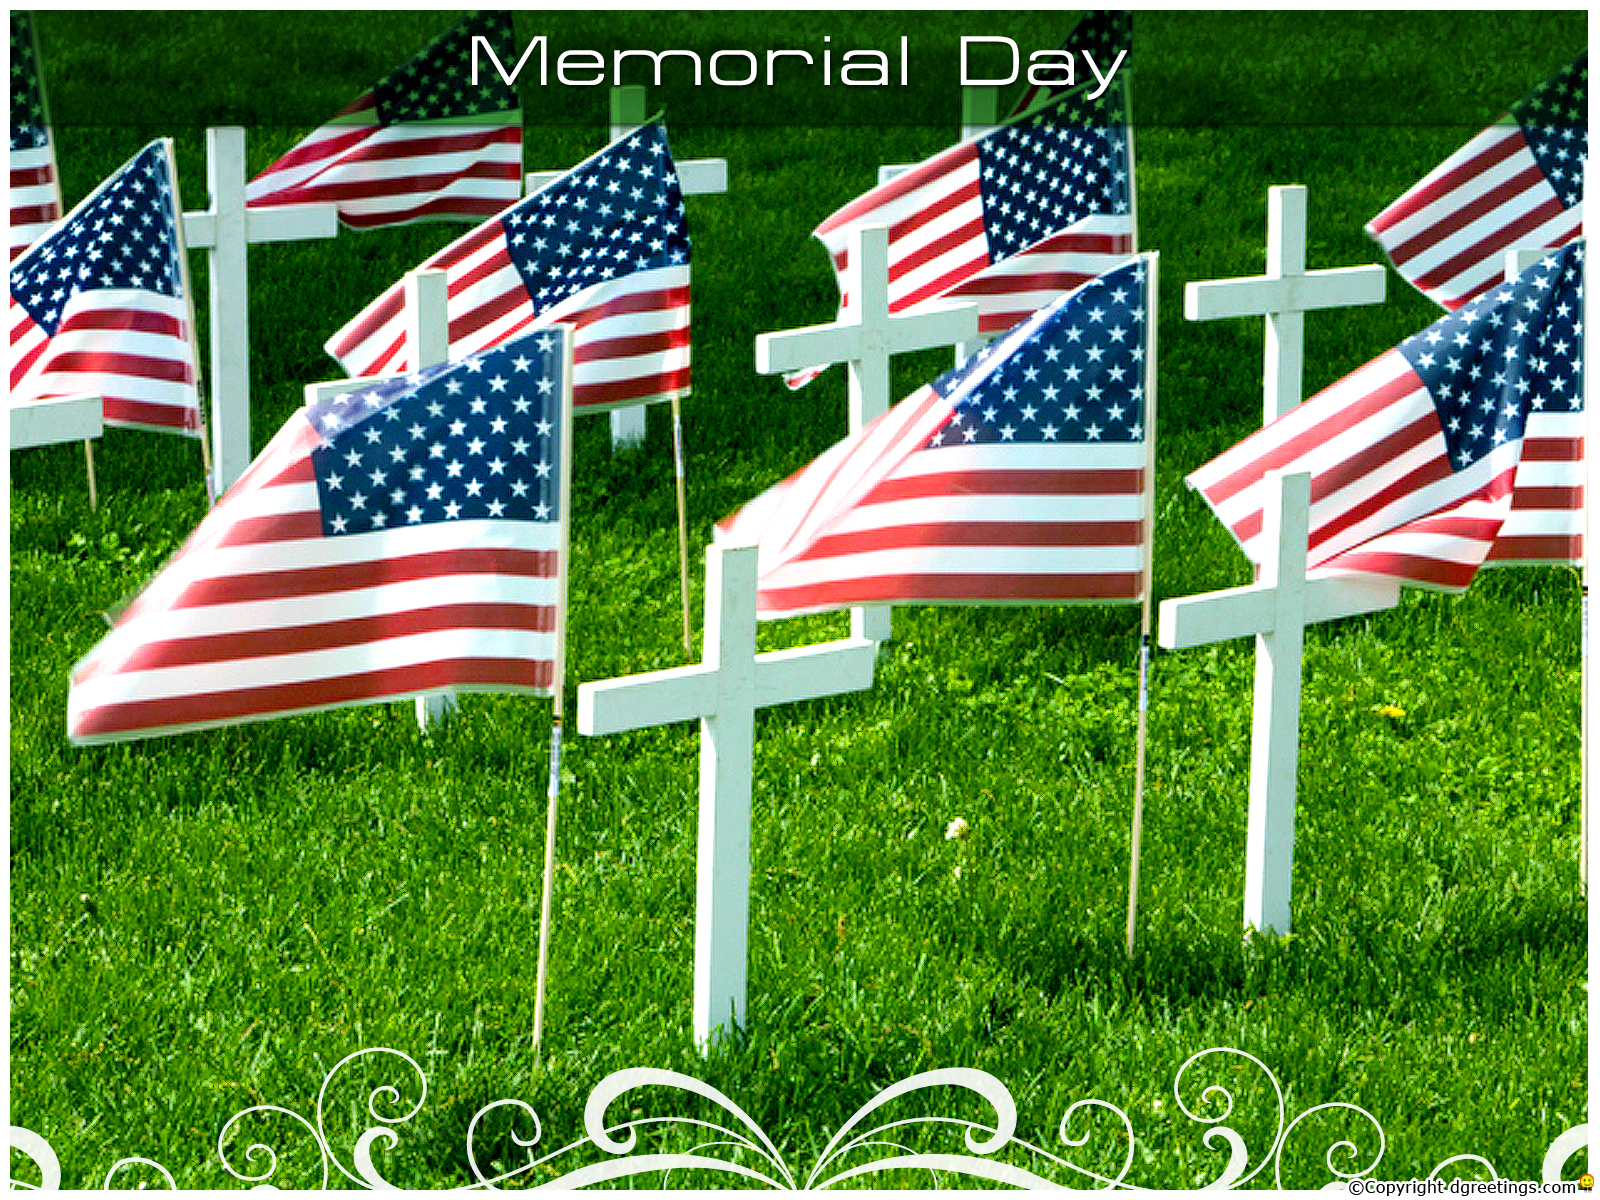  Memorial Day Wallpapers   Everything about PowerPoint Wallpapers